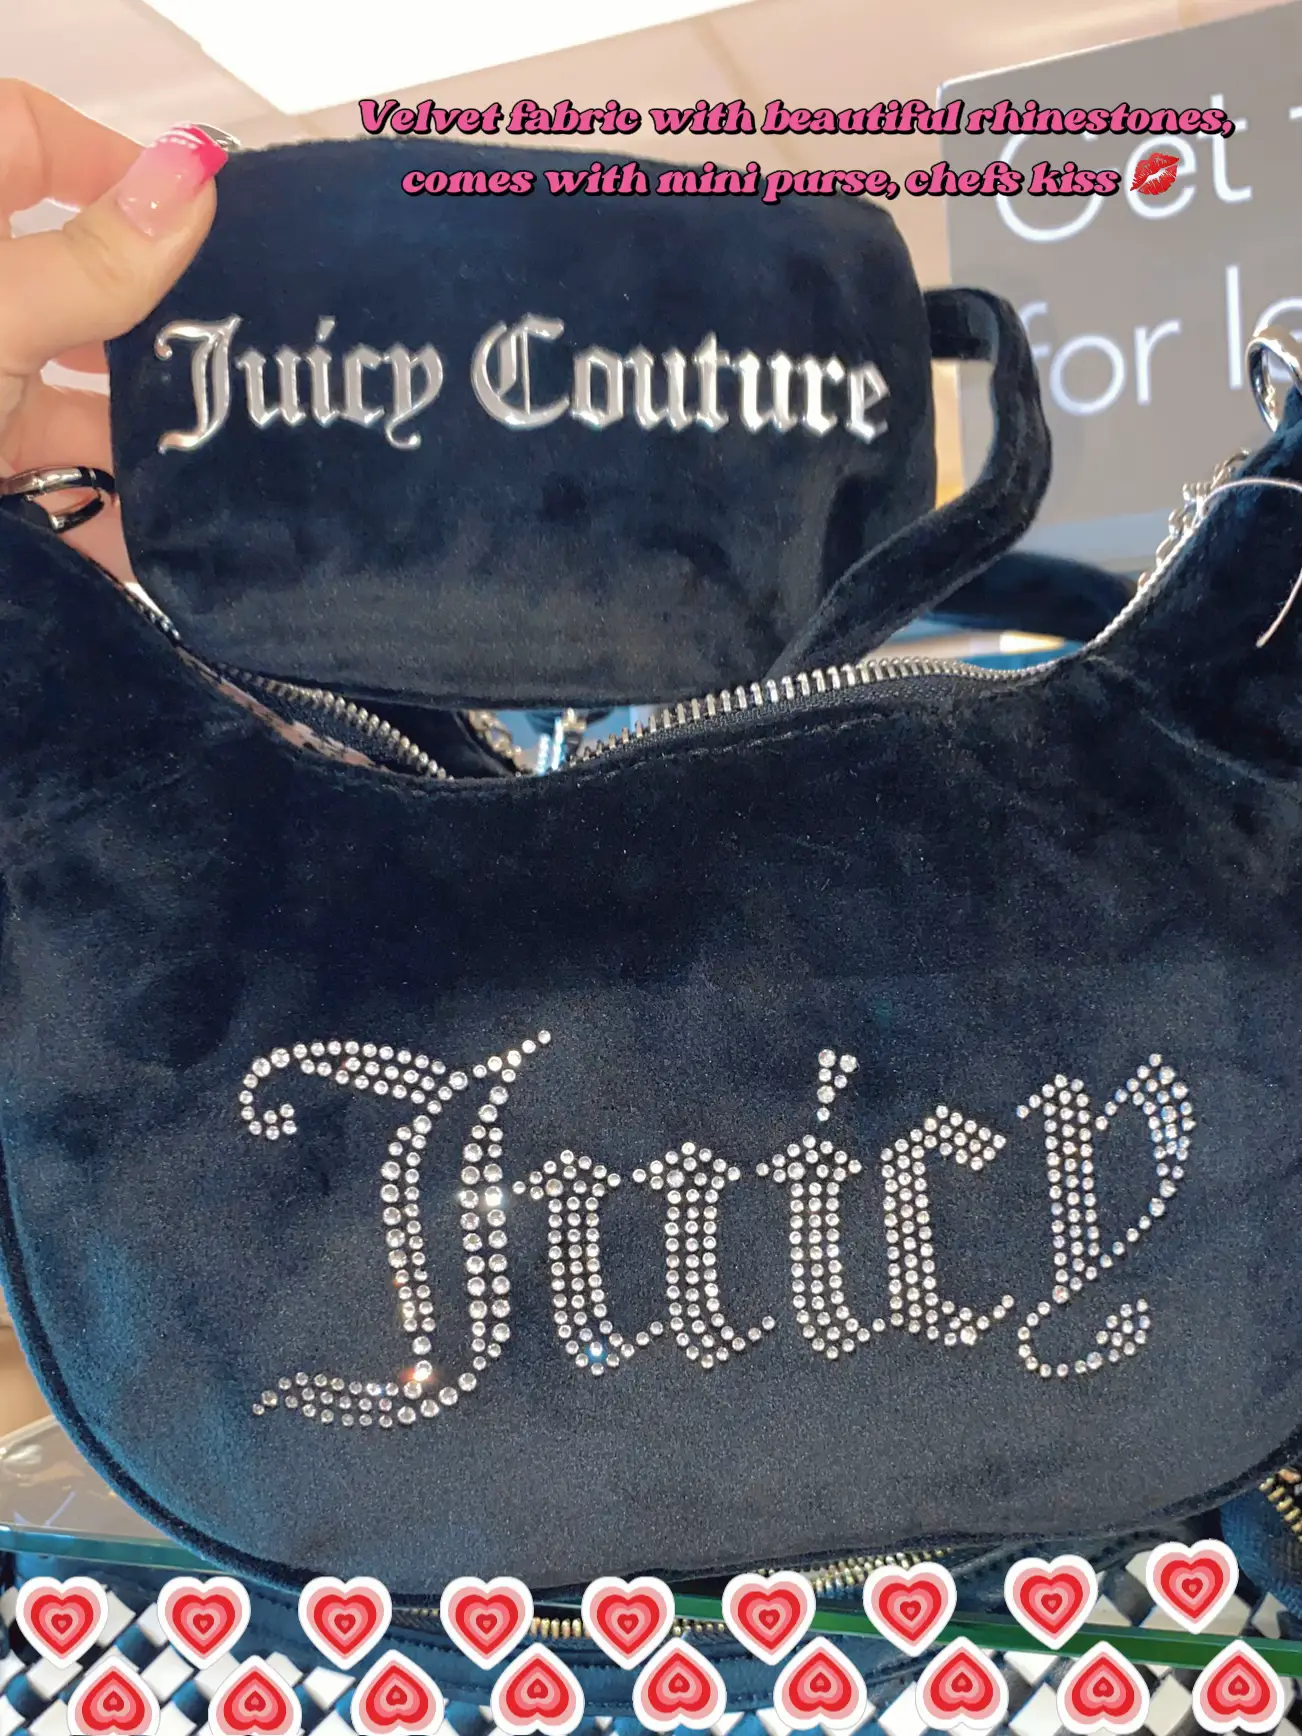 🛍Juicy Couture Sports Bra  Juicy couture, Couture, Juicy couture black  label